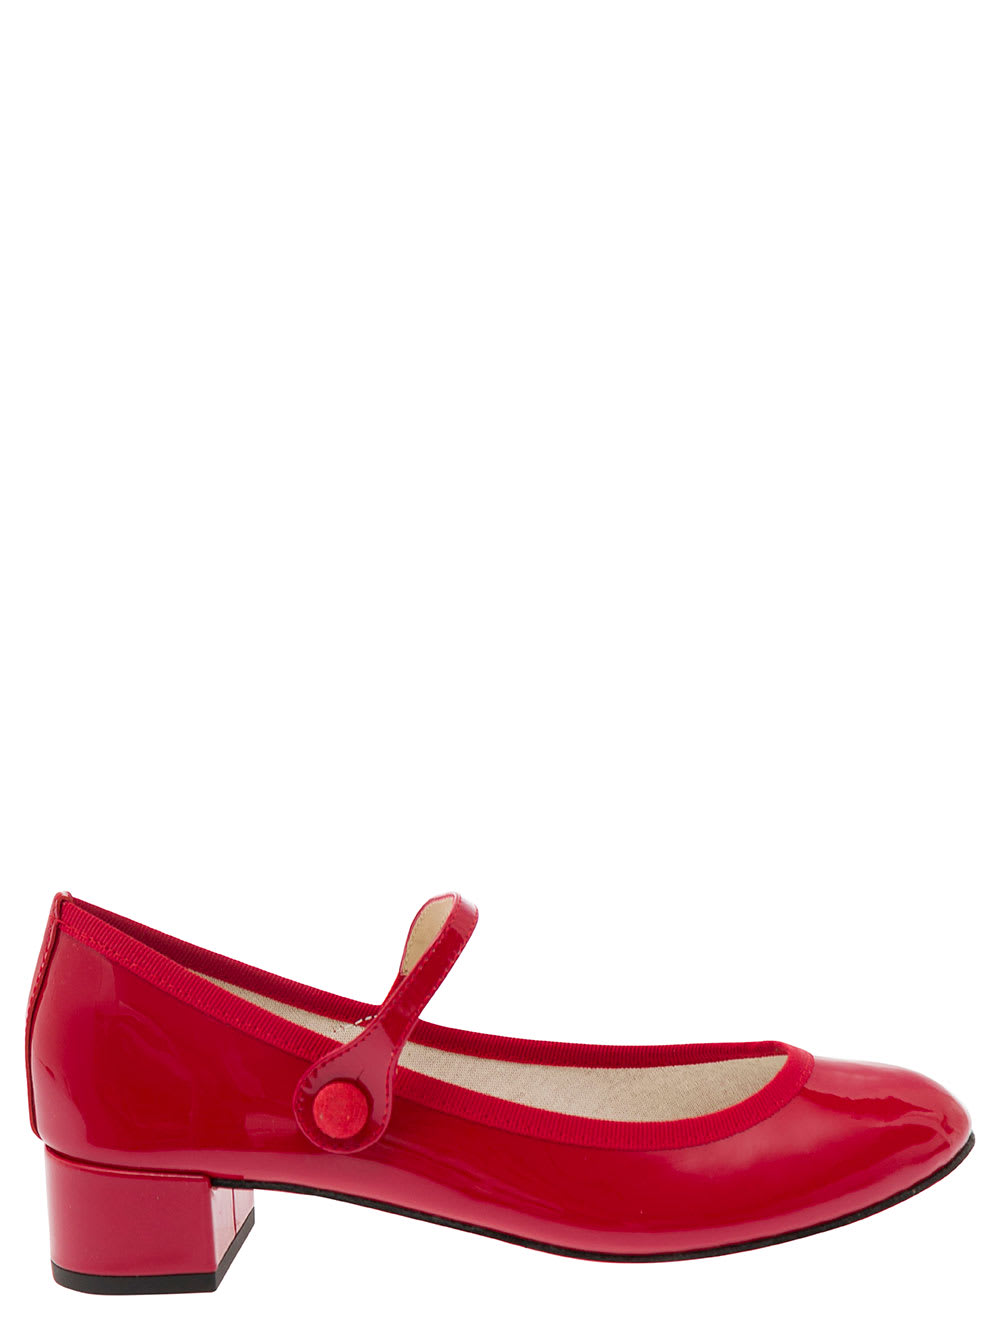 REPETTO ROSE RED MARY JANES WITH STRAP IN PATENT LEATHER WOMAN